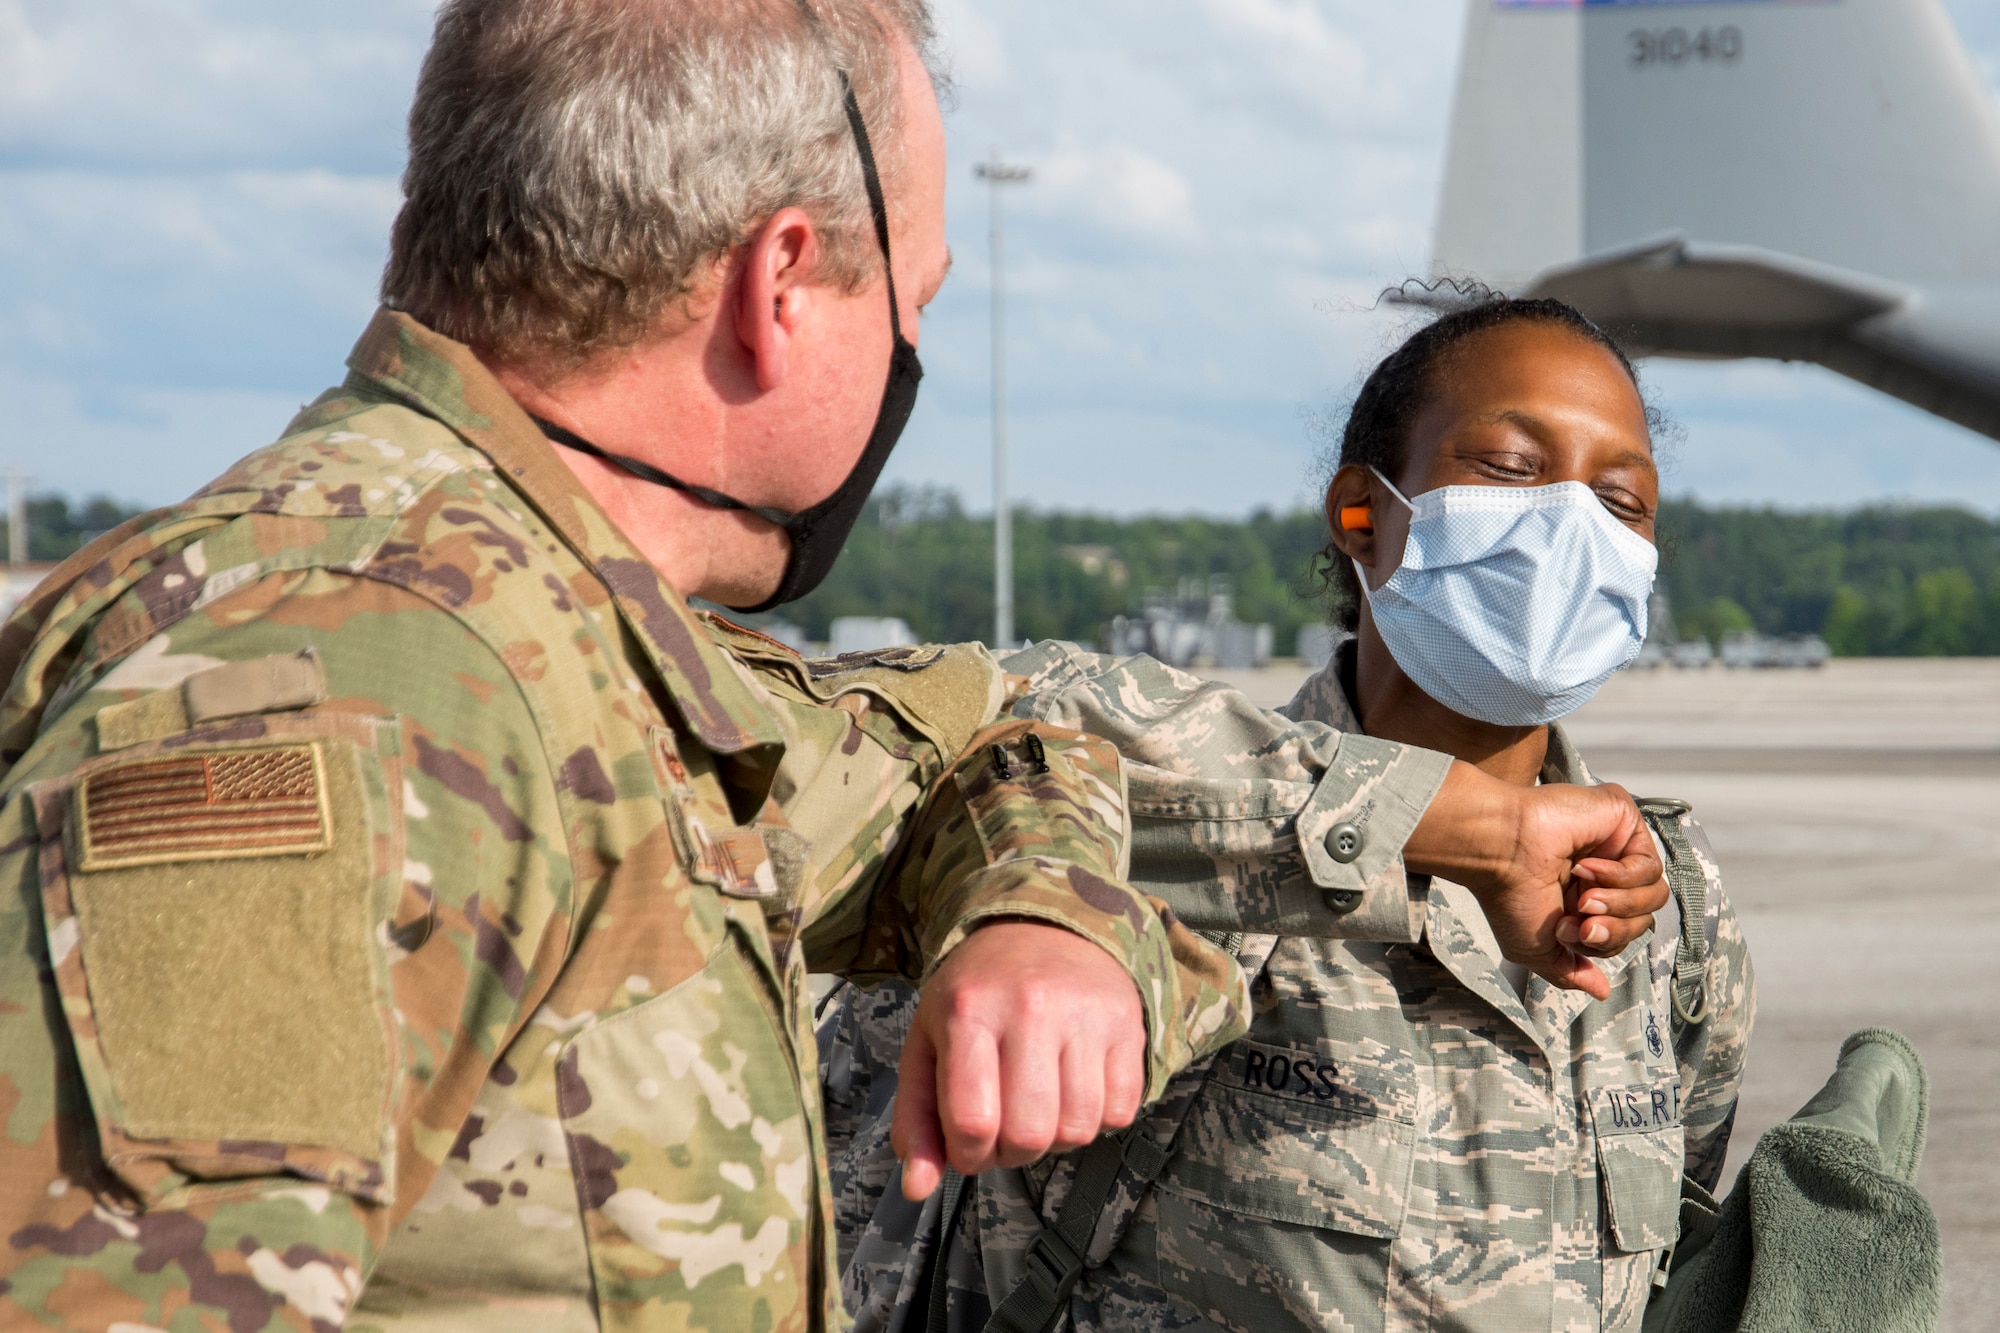 Maj. Enrika Ross, 94th Aeromedical Staging Squadron nursing OIC, greets Col. John Gillespie, 94th ASTS commander, on the flightline at Dobbins Air Reserve Base, Ga. shortly after arriving via a Dobbins C-130H3 Hercules on May 28, 2020. Ross was one of four Dobbins nurses who mobilized to New York City’s Queens Hospital, where she worked as a nurse in the medical-surgical unit as part of the whole-of-government response to the COVID-19 pandemic. (U.S. Air Force photo/Andrew Park)